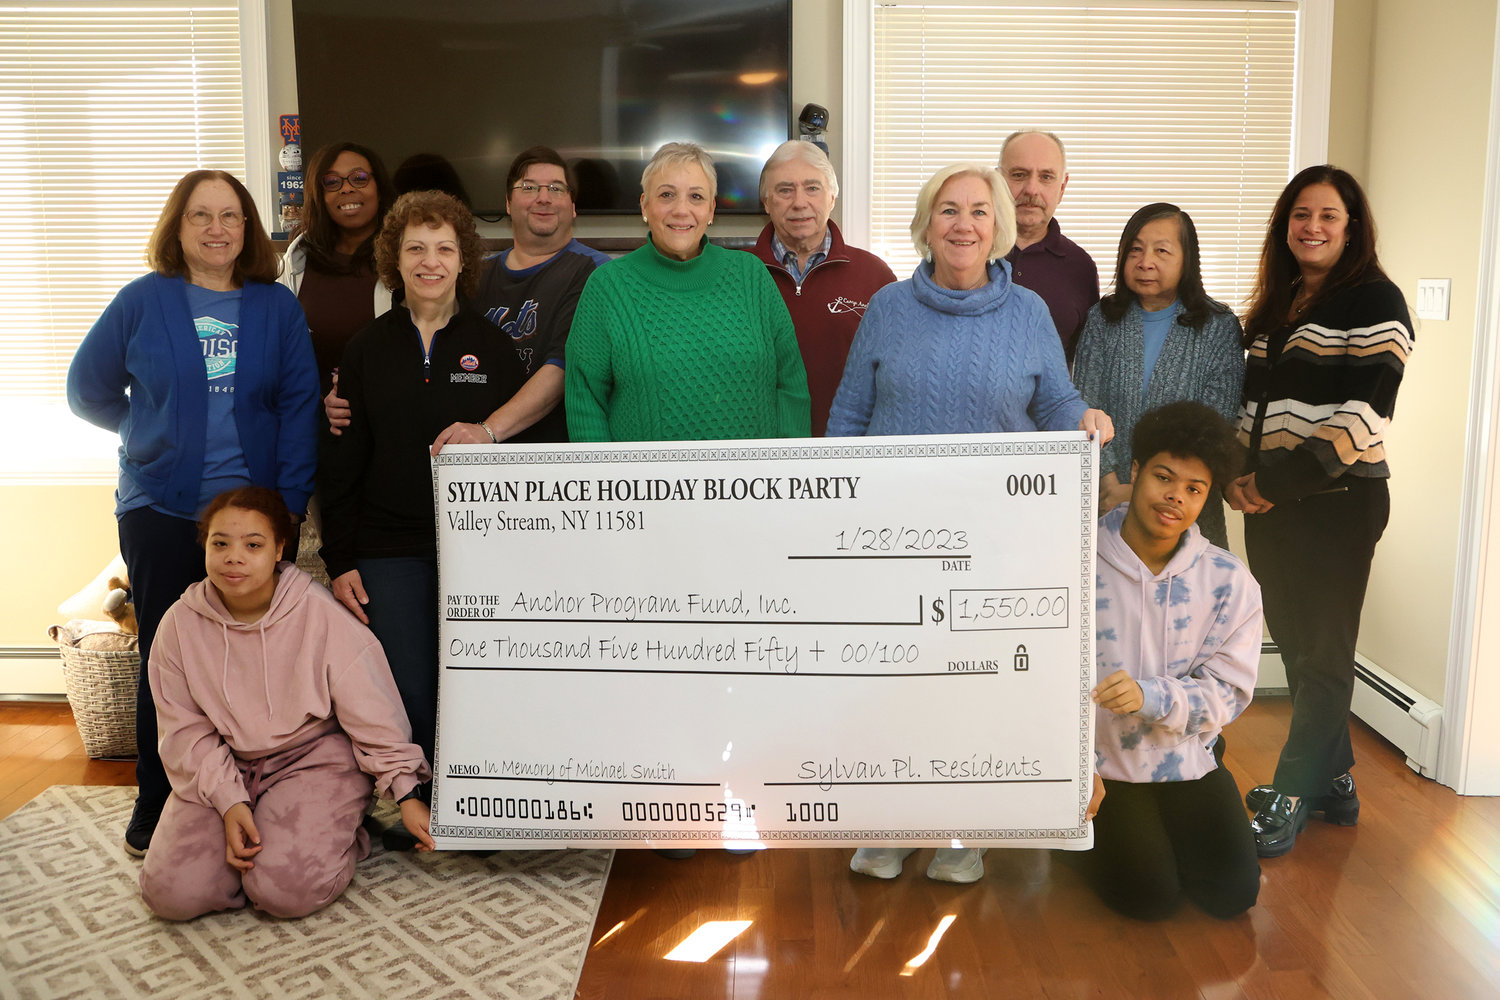 Despite not having a normal block party this past holiday season, neighbors on Sylvan Place raised money and donated $3,100 to two organizations, including $1,550 to the Anchor Program Fund. Above, Rosalie Machalow, Sherise Dowling and her children Candice and Marcus, Sheryl and Alex Carr, John McGovern, and Wally and Carole Schroeder present checks to Susan Cuoccio and Mary Ann Hanson, of Camp Anchor, and Ronni Gould, of the Sunrise Association.